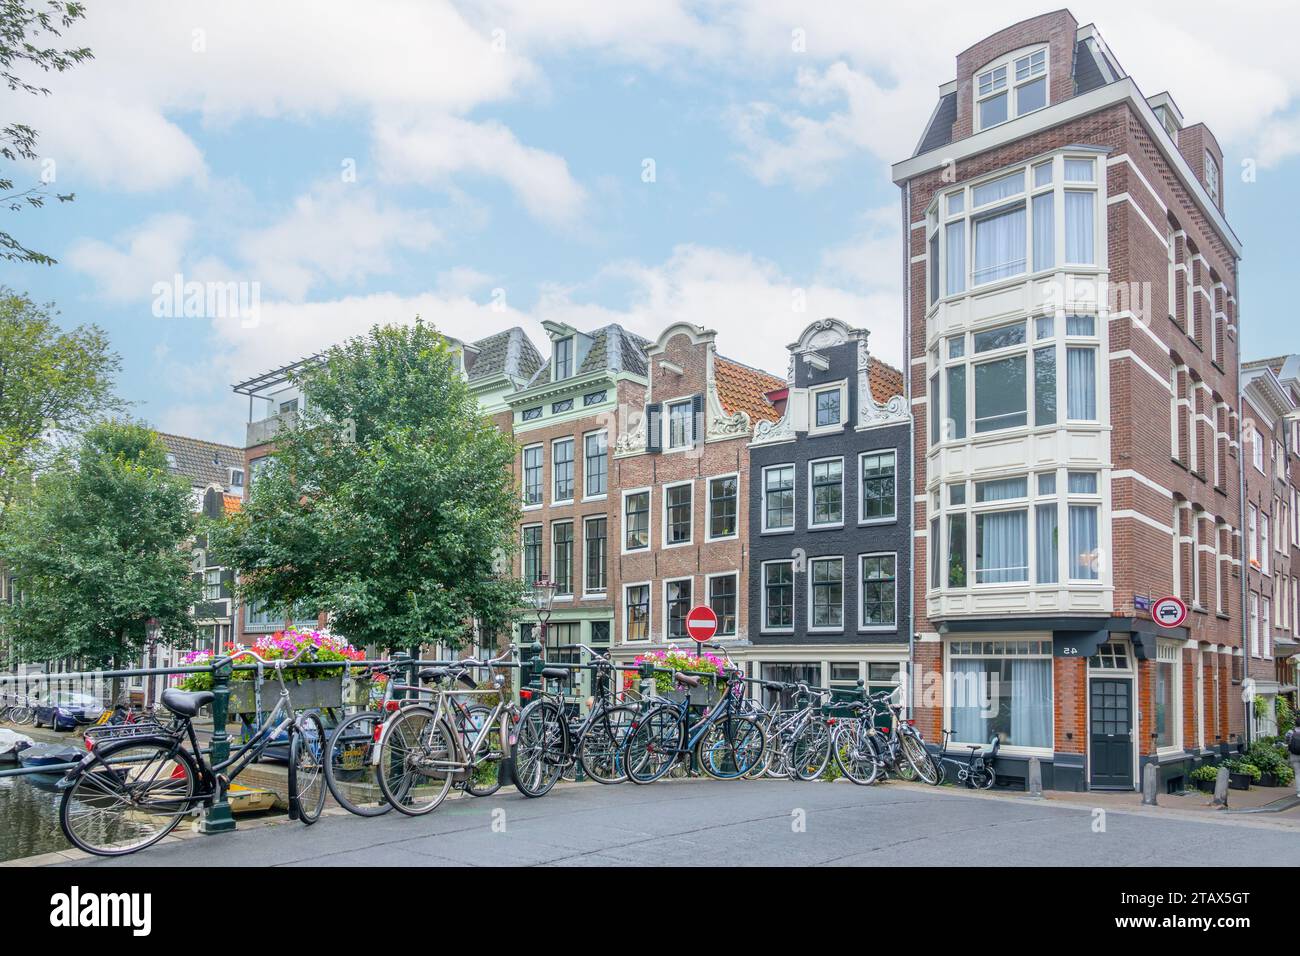 Netherlands. Summer day in Amsterdam. Light clouds in the blue sky. Several bicycles are parked near the railing of a bridge over a canal Stock Photo